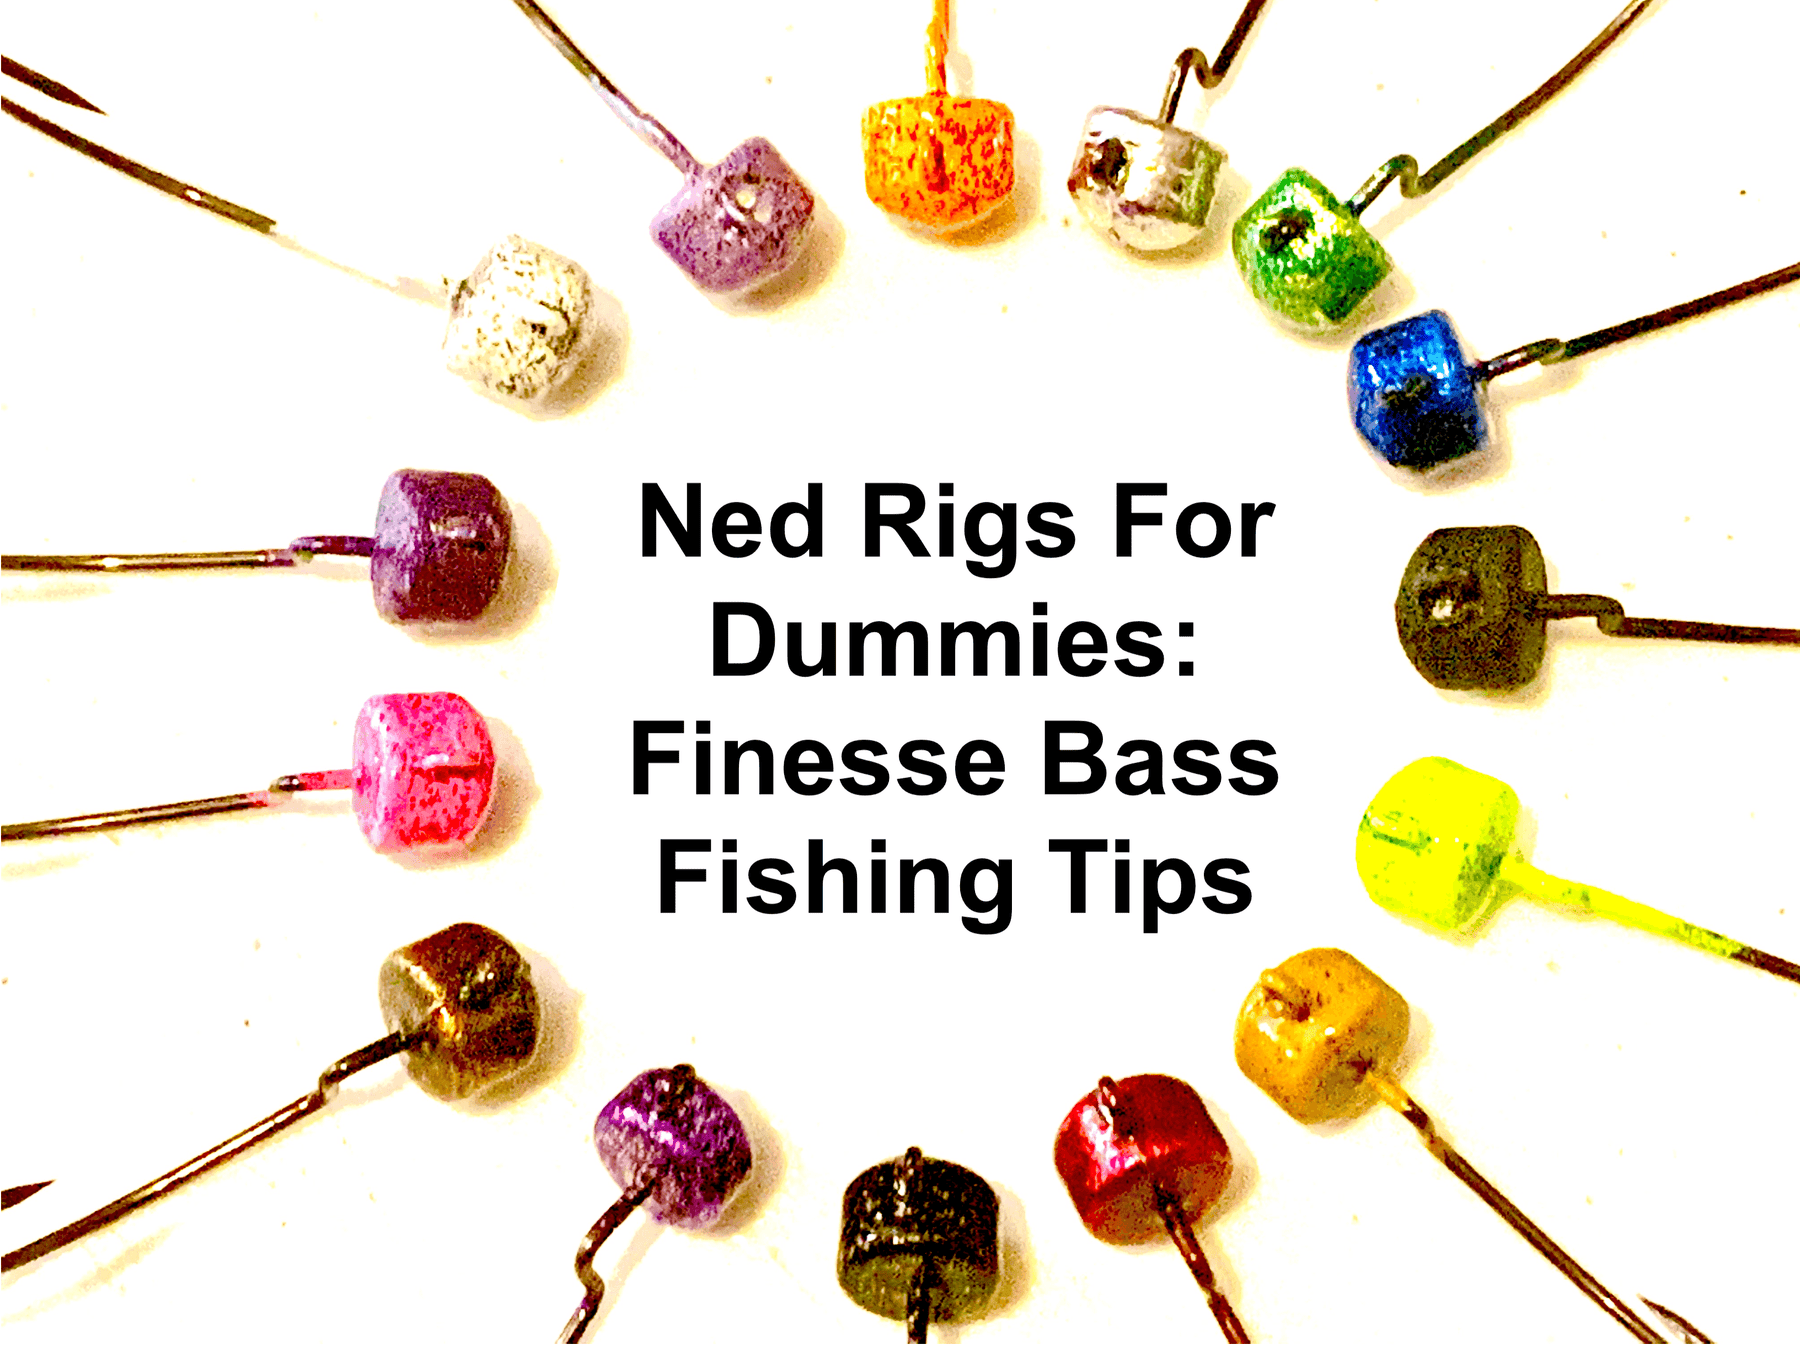 Ned Rigs For Dummies: Finesse Bass Fishing Tips